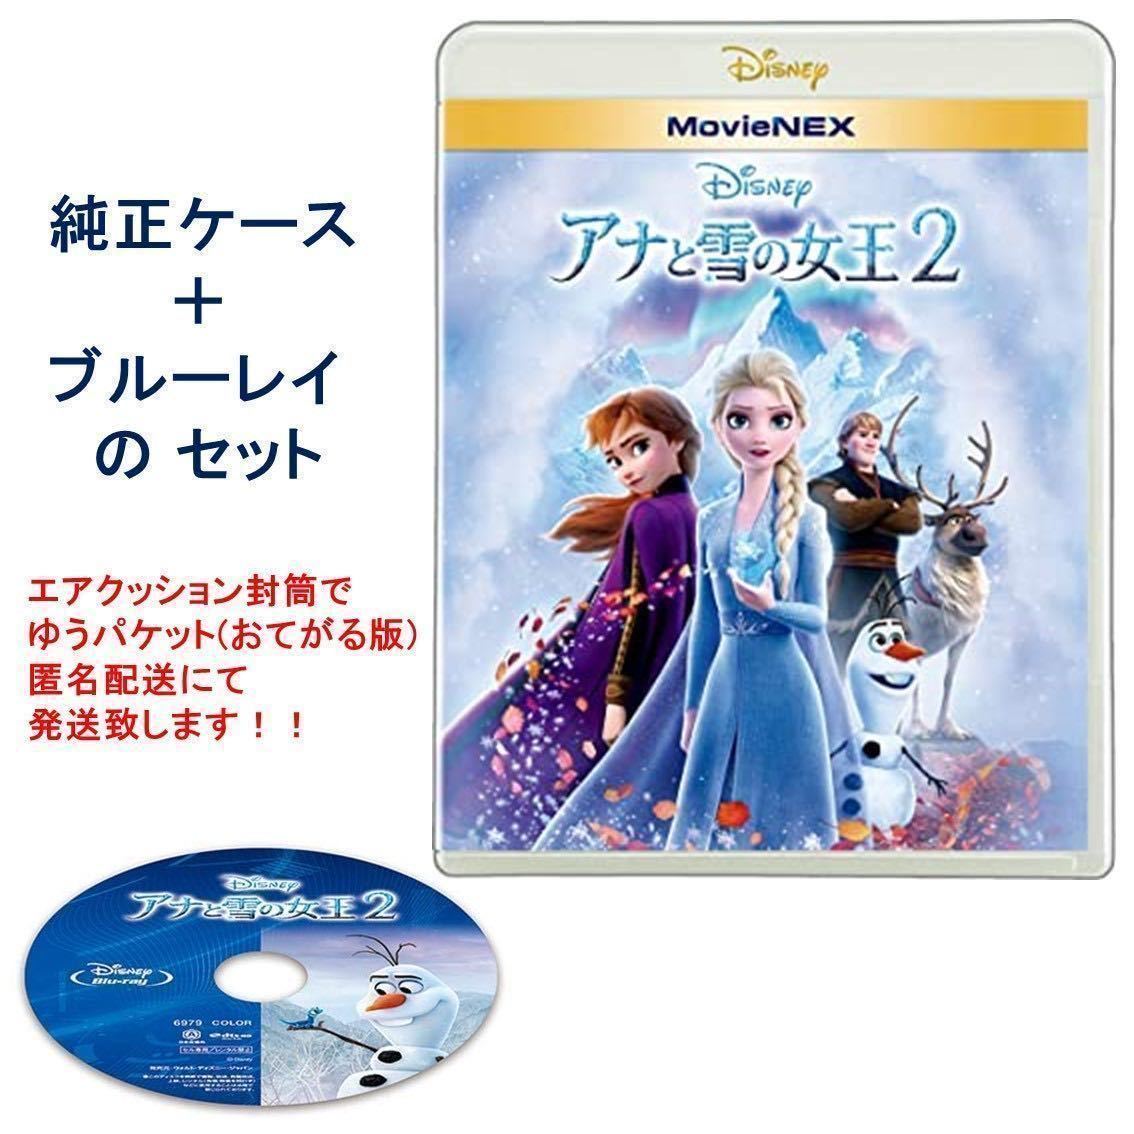 Y103 hole . snow. woman .2 Blue-ray . original case not yet reproduction goods domestic regular goods enclosure possible Disney MovieNEX Blu-ray only (DVD*Magic code none )